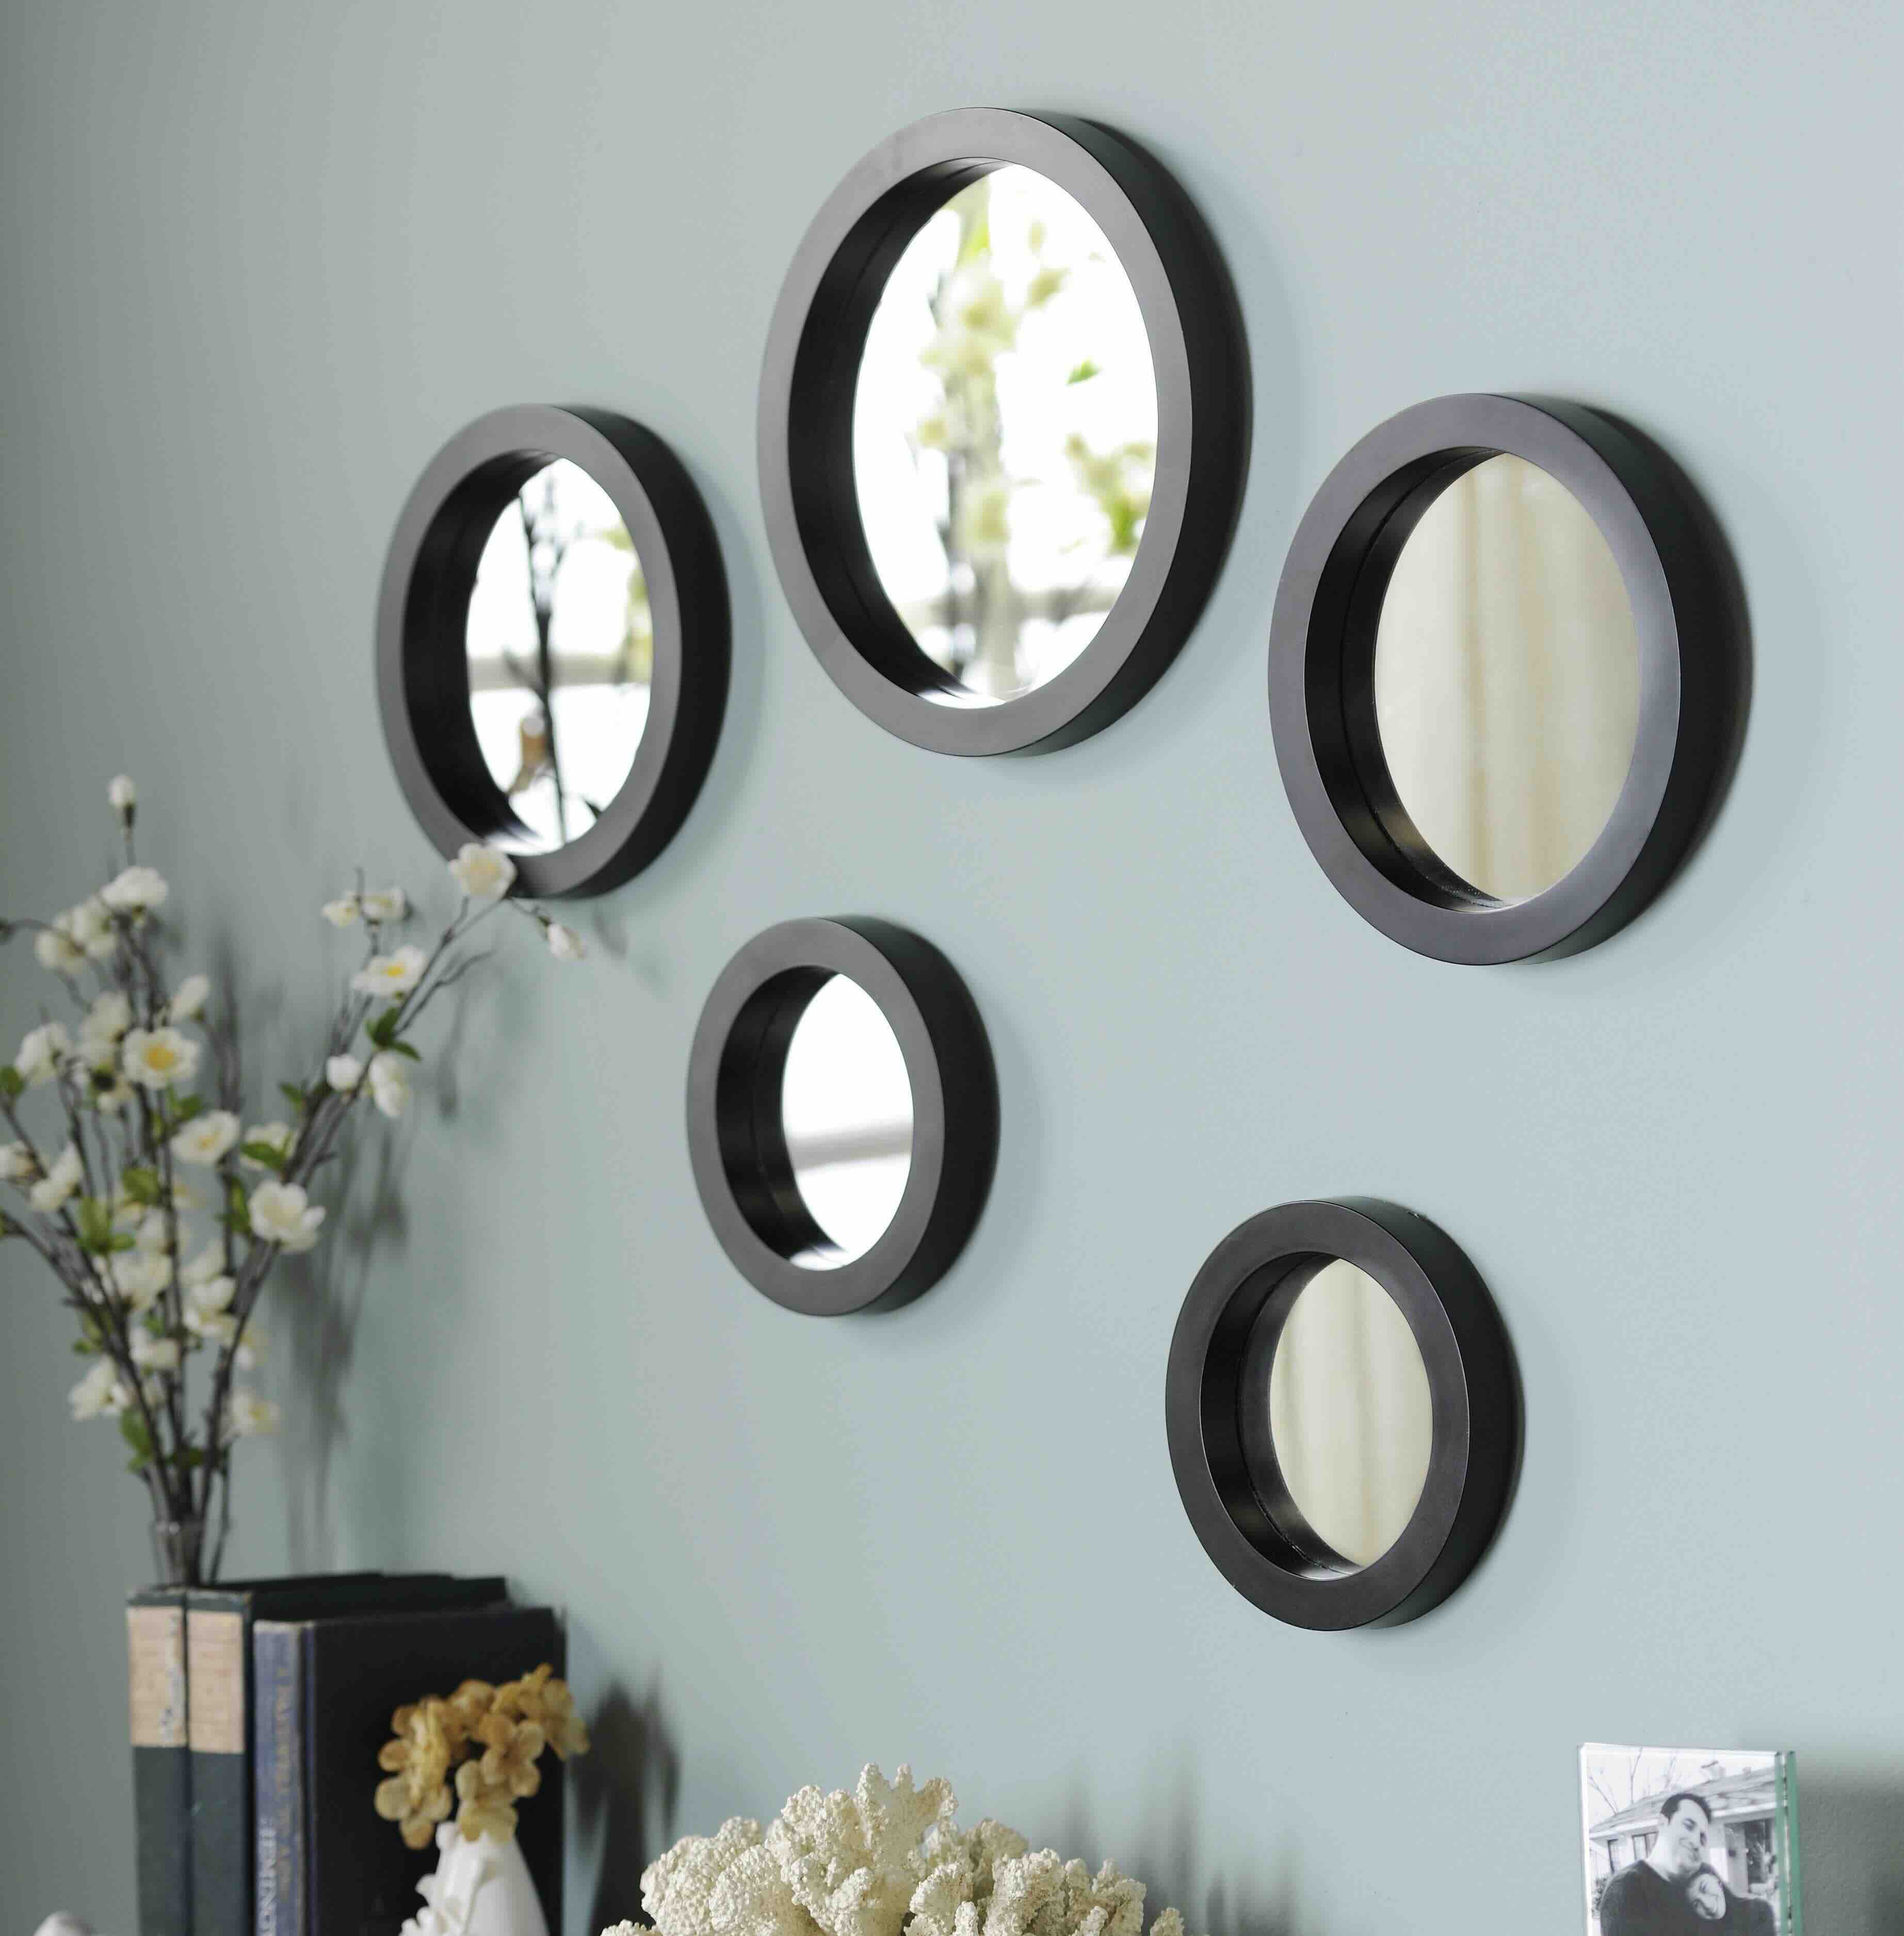 How To Arrange Circular Mirrors On A Wall